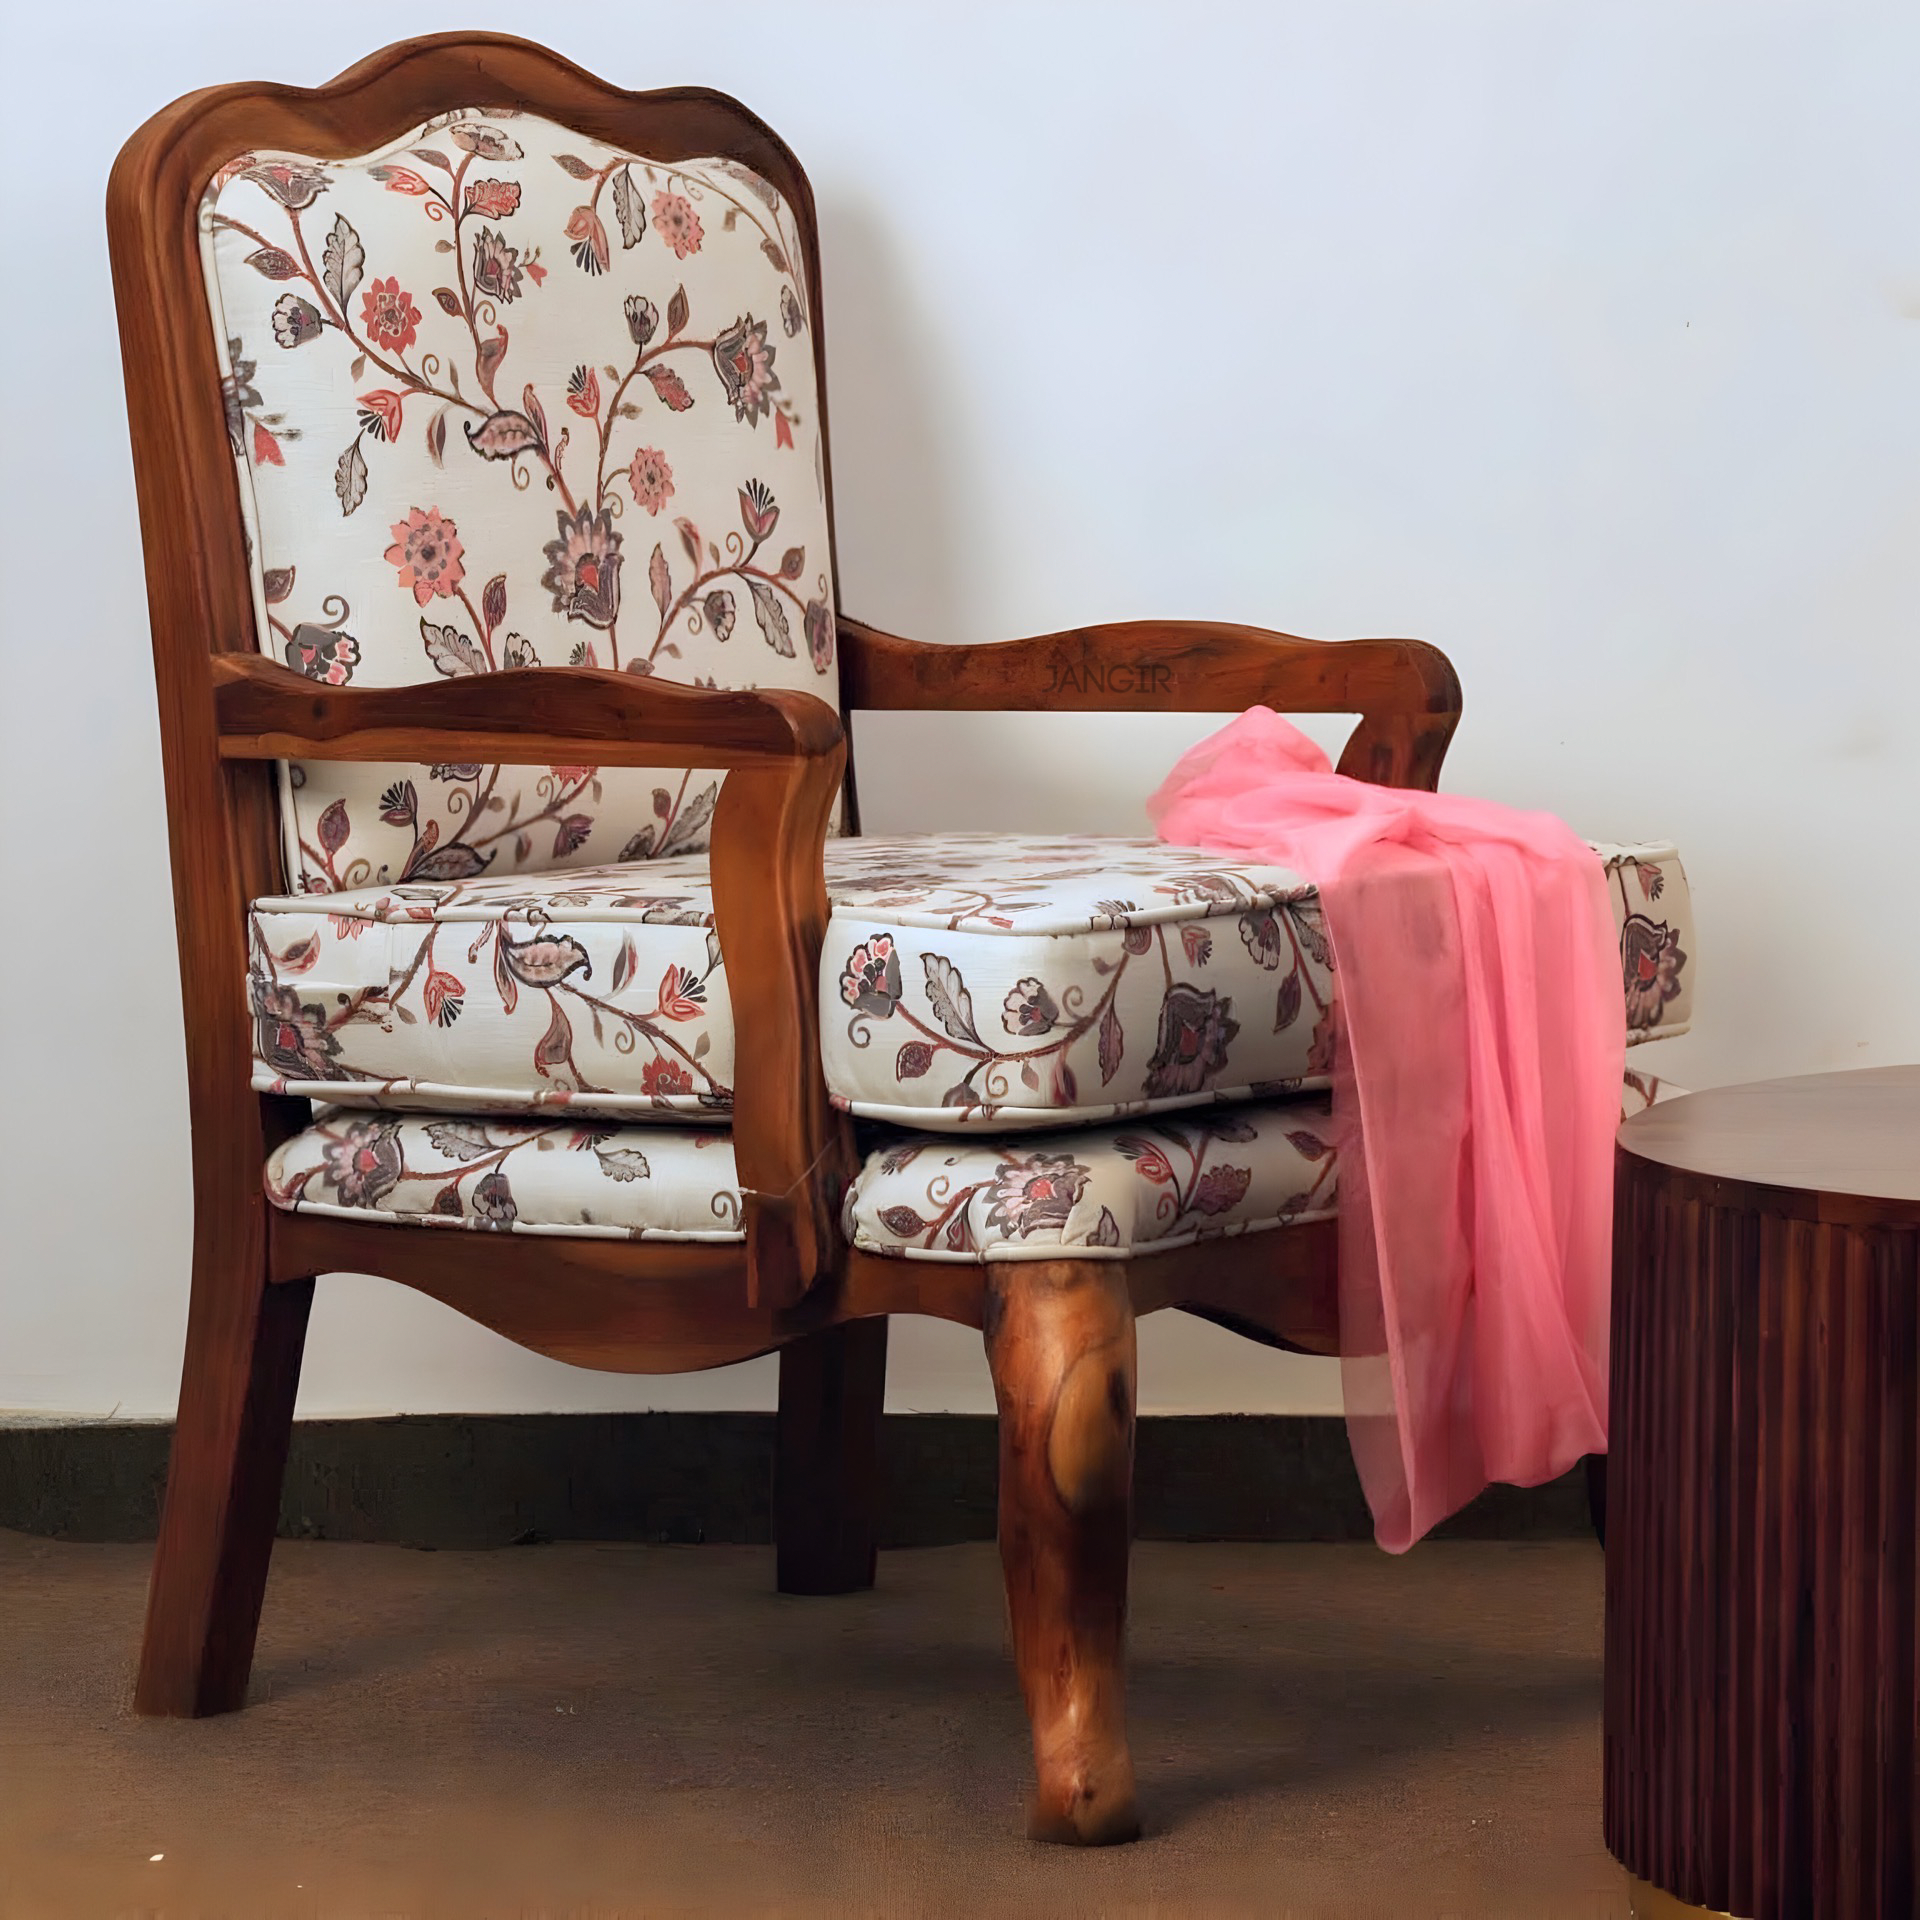 Upgrade your Living room with our Chair, made with sheesham wood. This Wooden Upholstery easy chair is perfect for your living room or bedroom. Get this designer Armchair and enjoy superior quality.